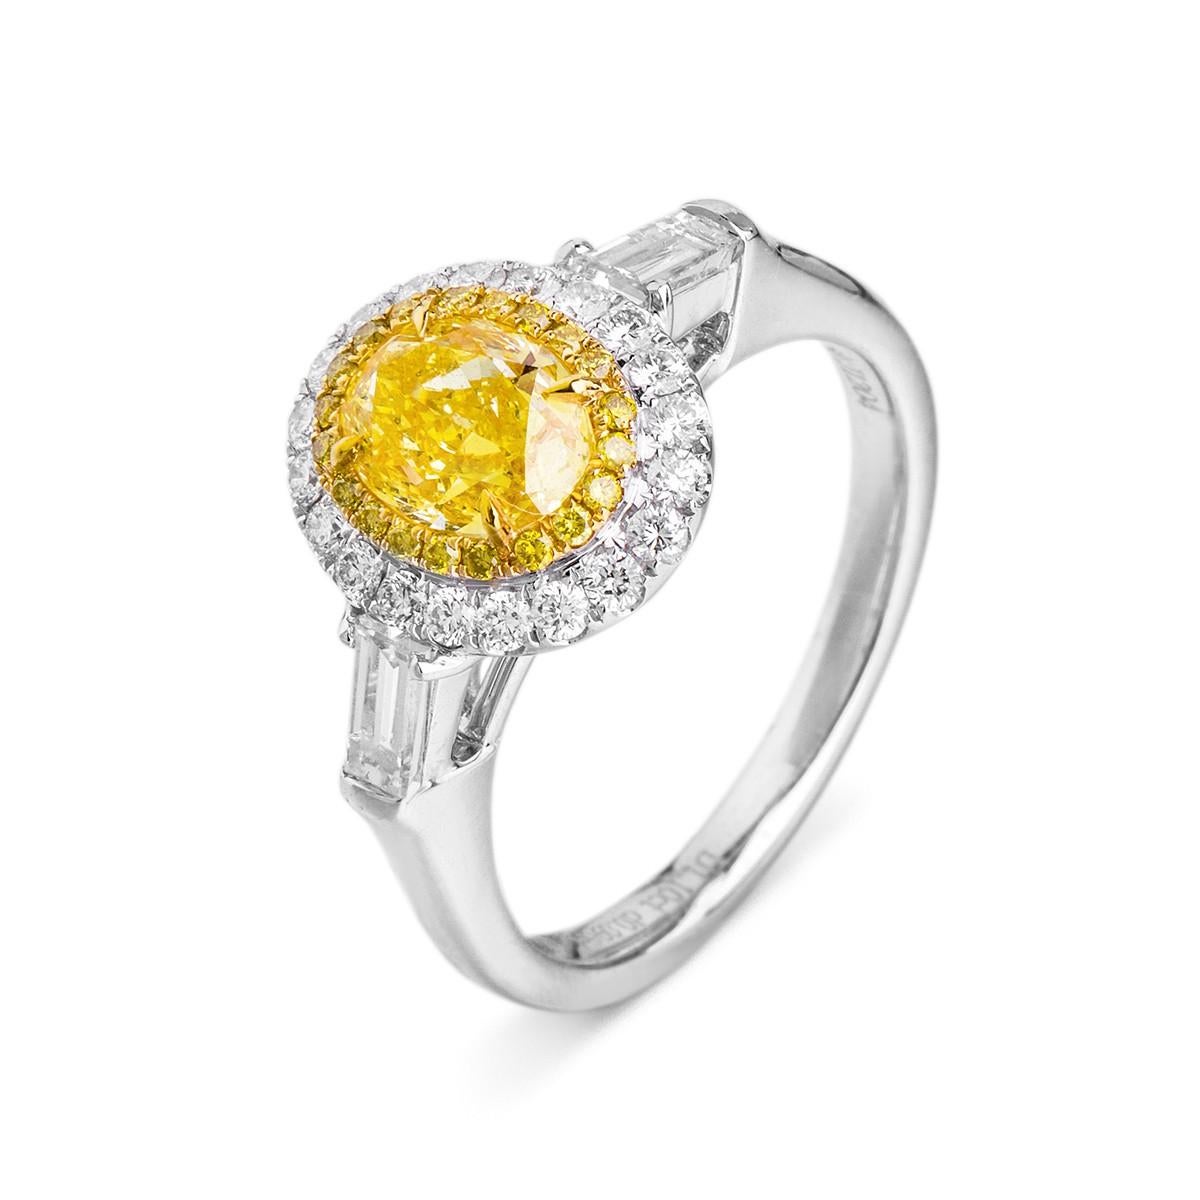 WHITE GOLD OVAL FANCY YELLOW HALO DIAMOND RING - 1.71 CT


Set in 18K White gold


Total fancy yellow diamond weight: 1.04 ct

[ 1 diamond ]
Color: Fancy yellow
Clarity: SI1

Total white diamond weight: 0.59 ct
[ 22 diamonds ]
Color: G-H
Clarity: